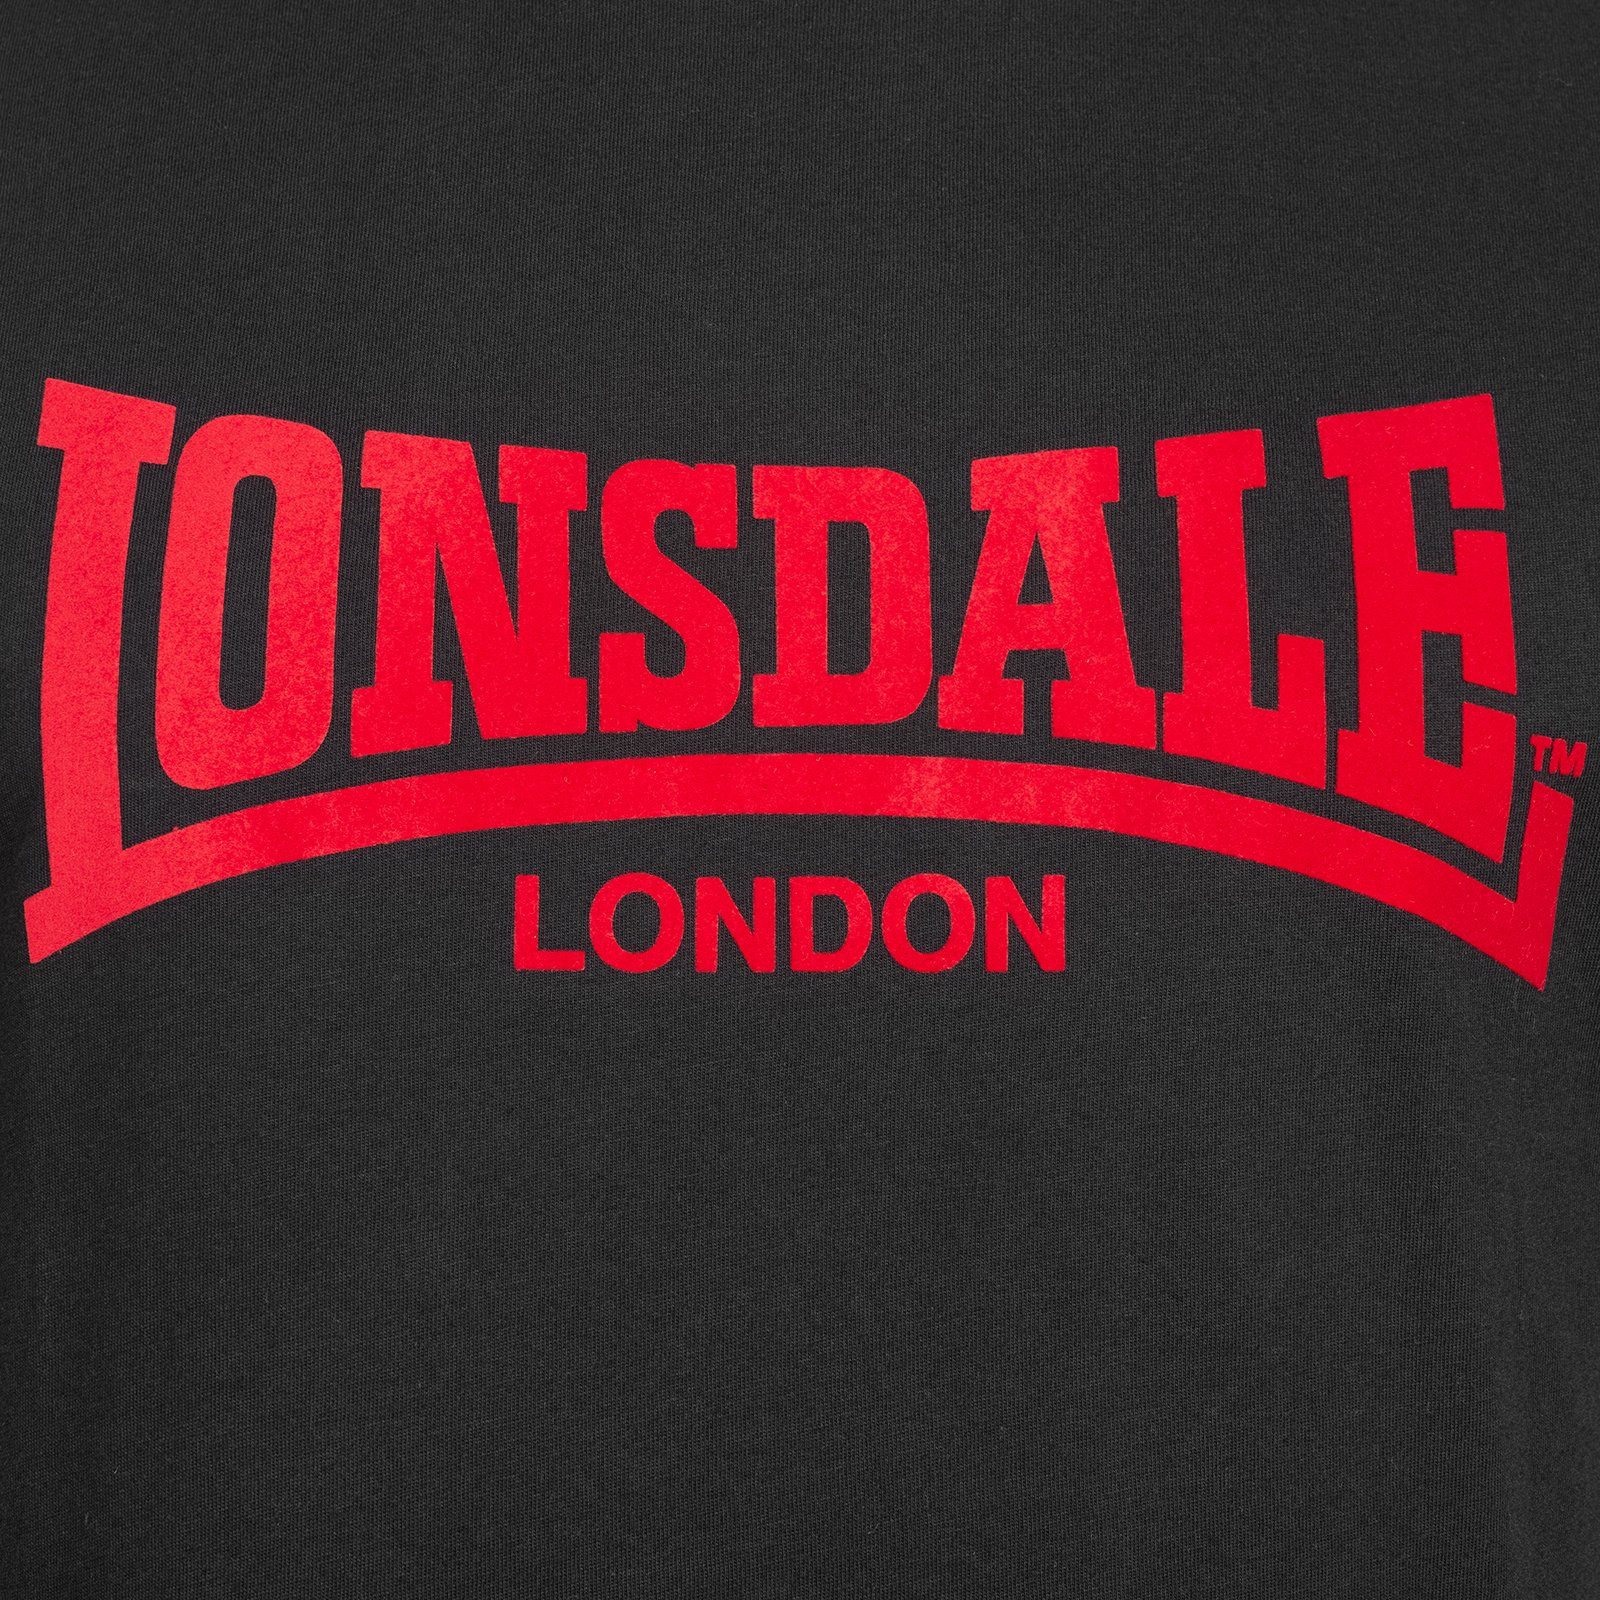 LL008 T-Shirt TONE Black/Red ONE Lonsdale